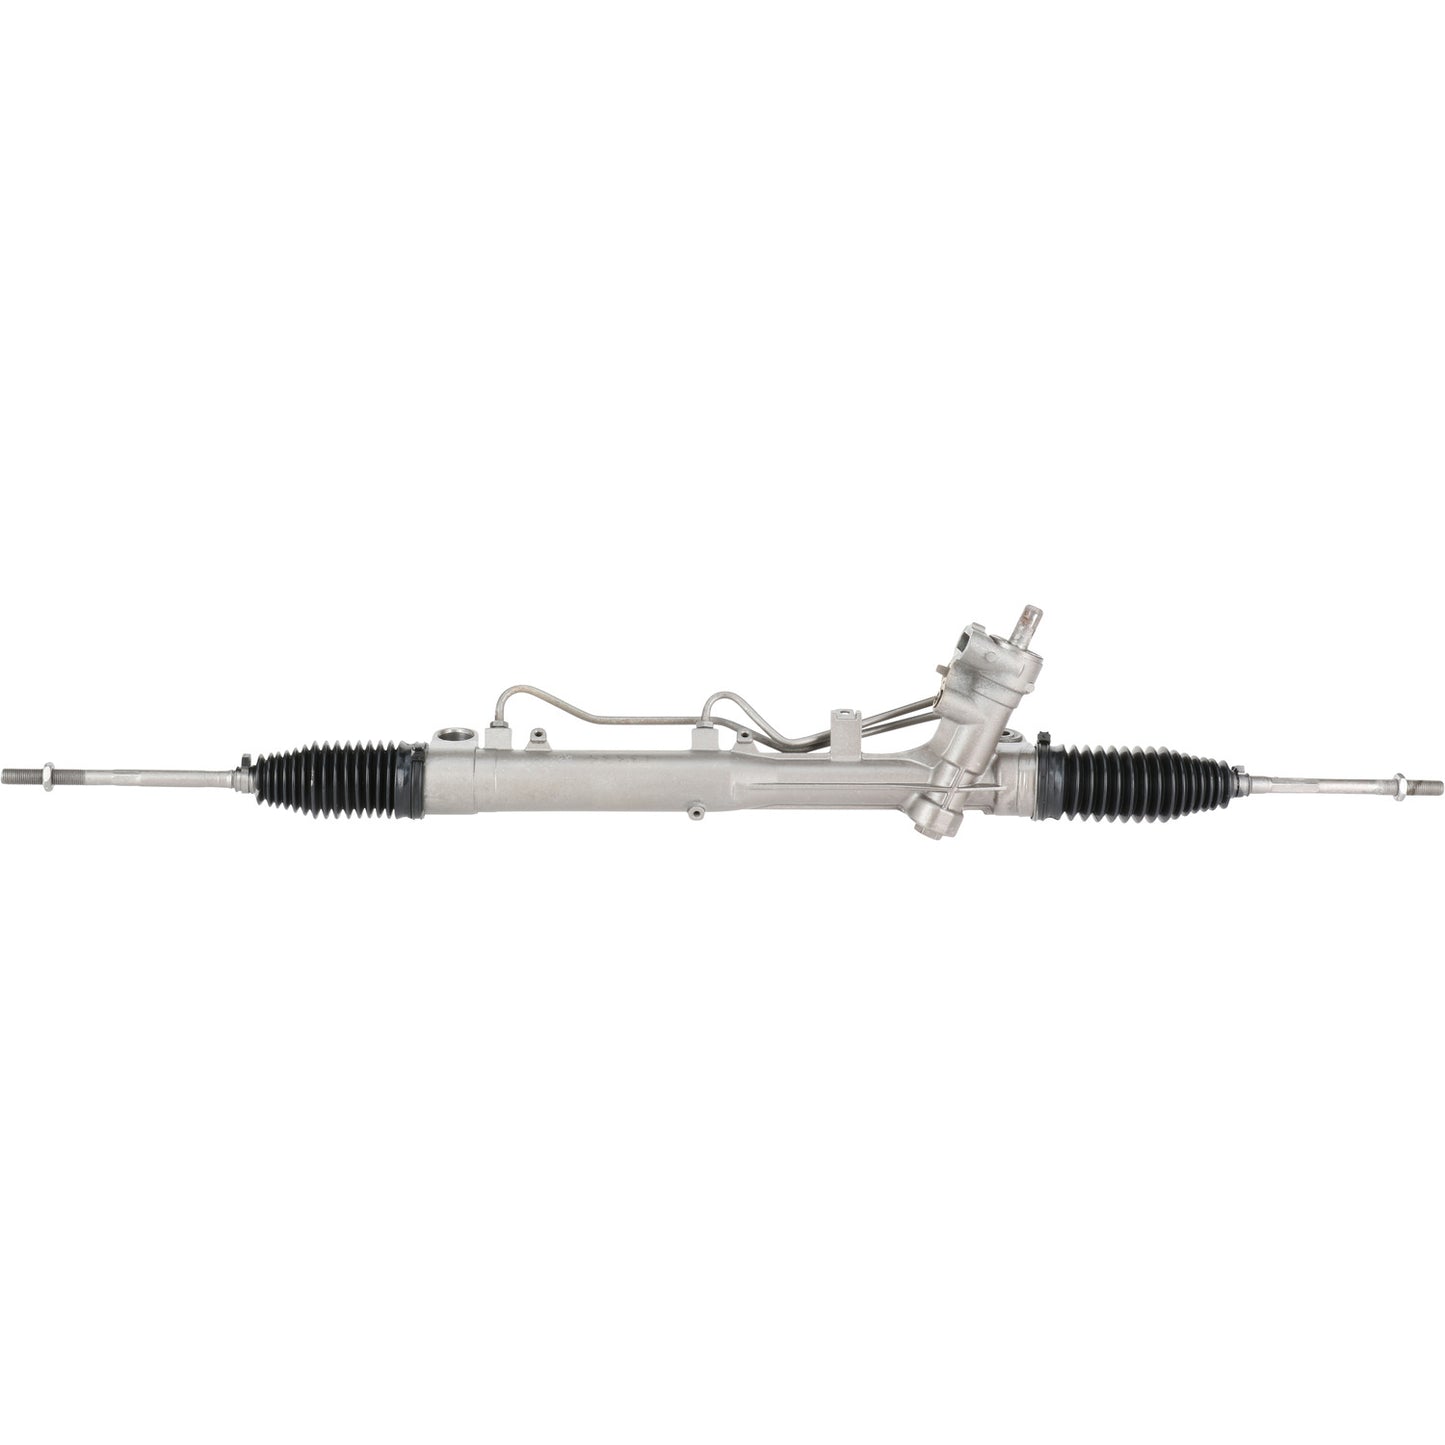 Rack and Pinion Assembly - MAVAL - Hydraulic Power - Remanufactured - 93334M